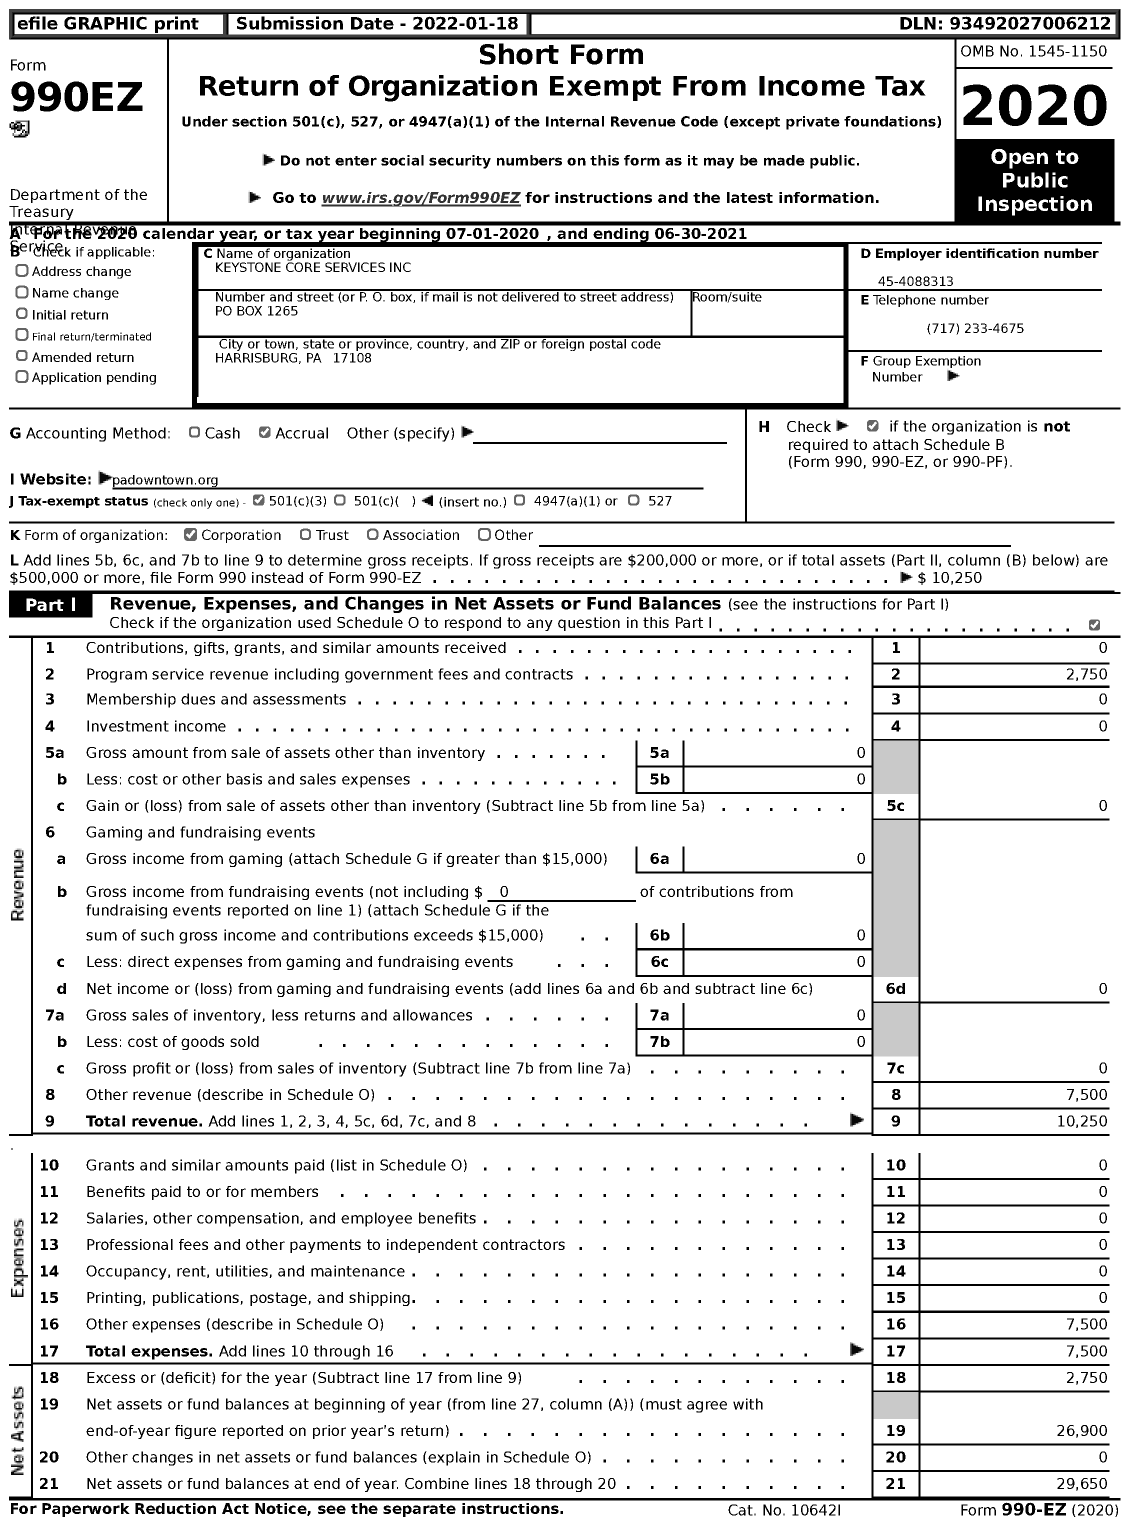 Image of first page of 2020 Form 990EZ for Keystone Core Services